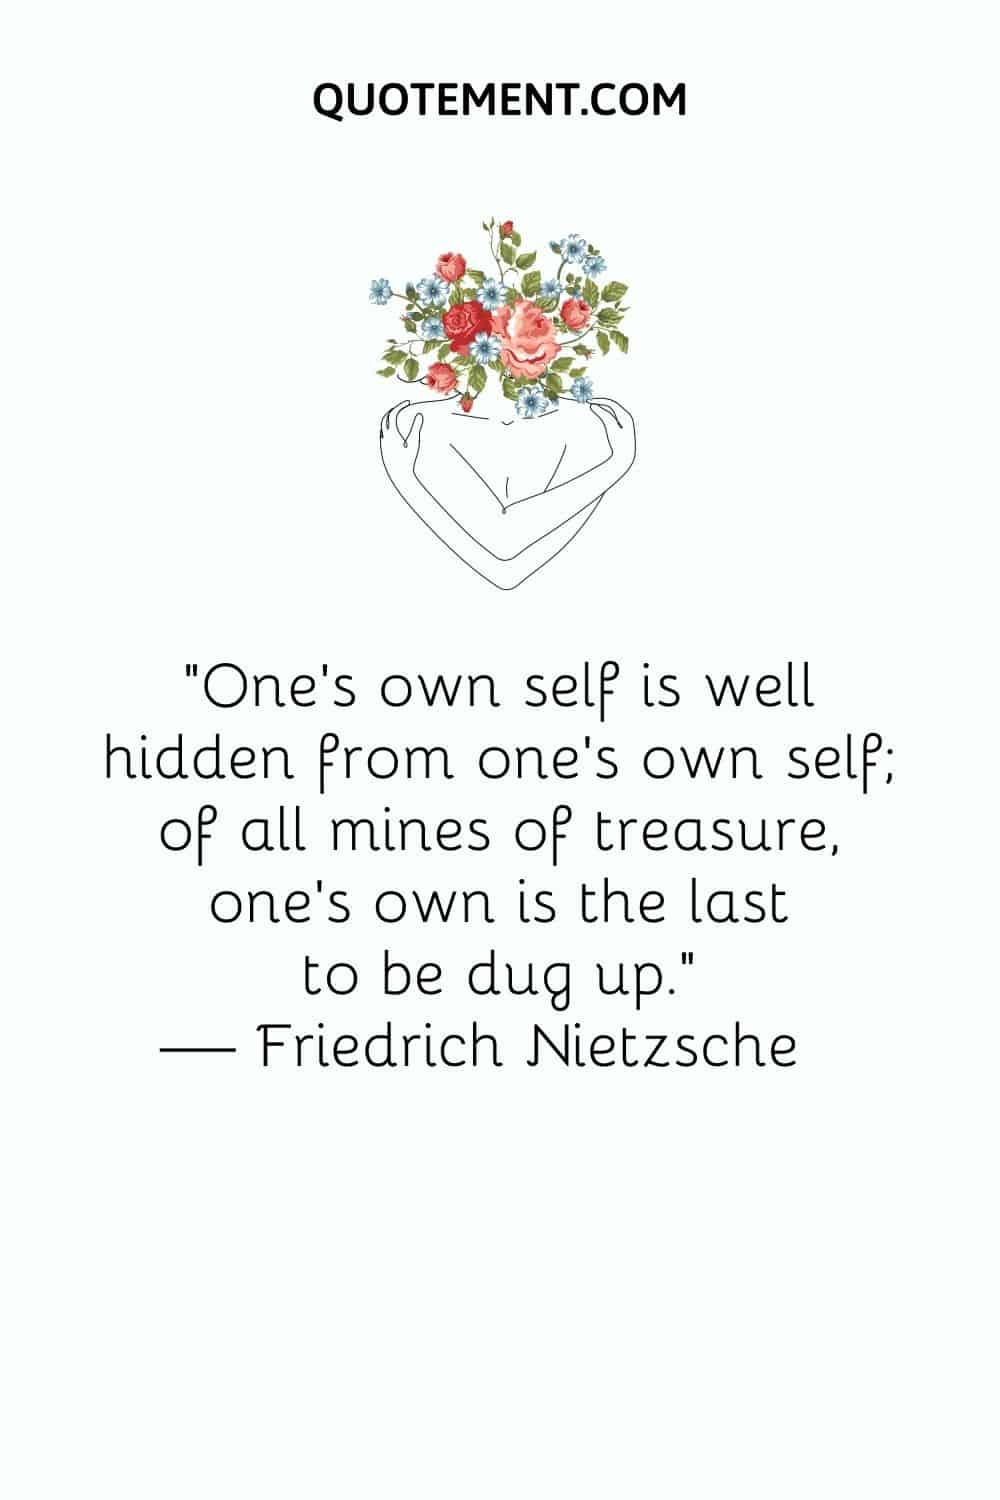 One's own self is well hidden from one's own self